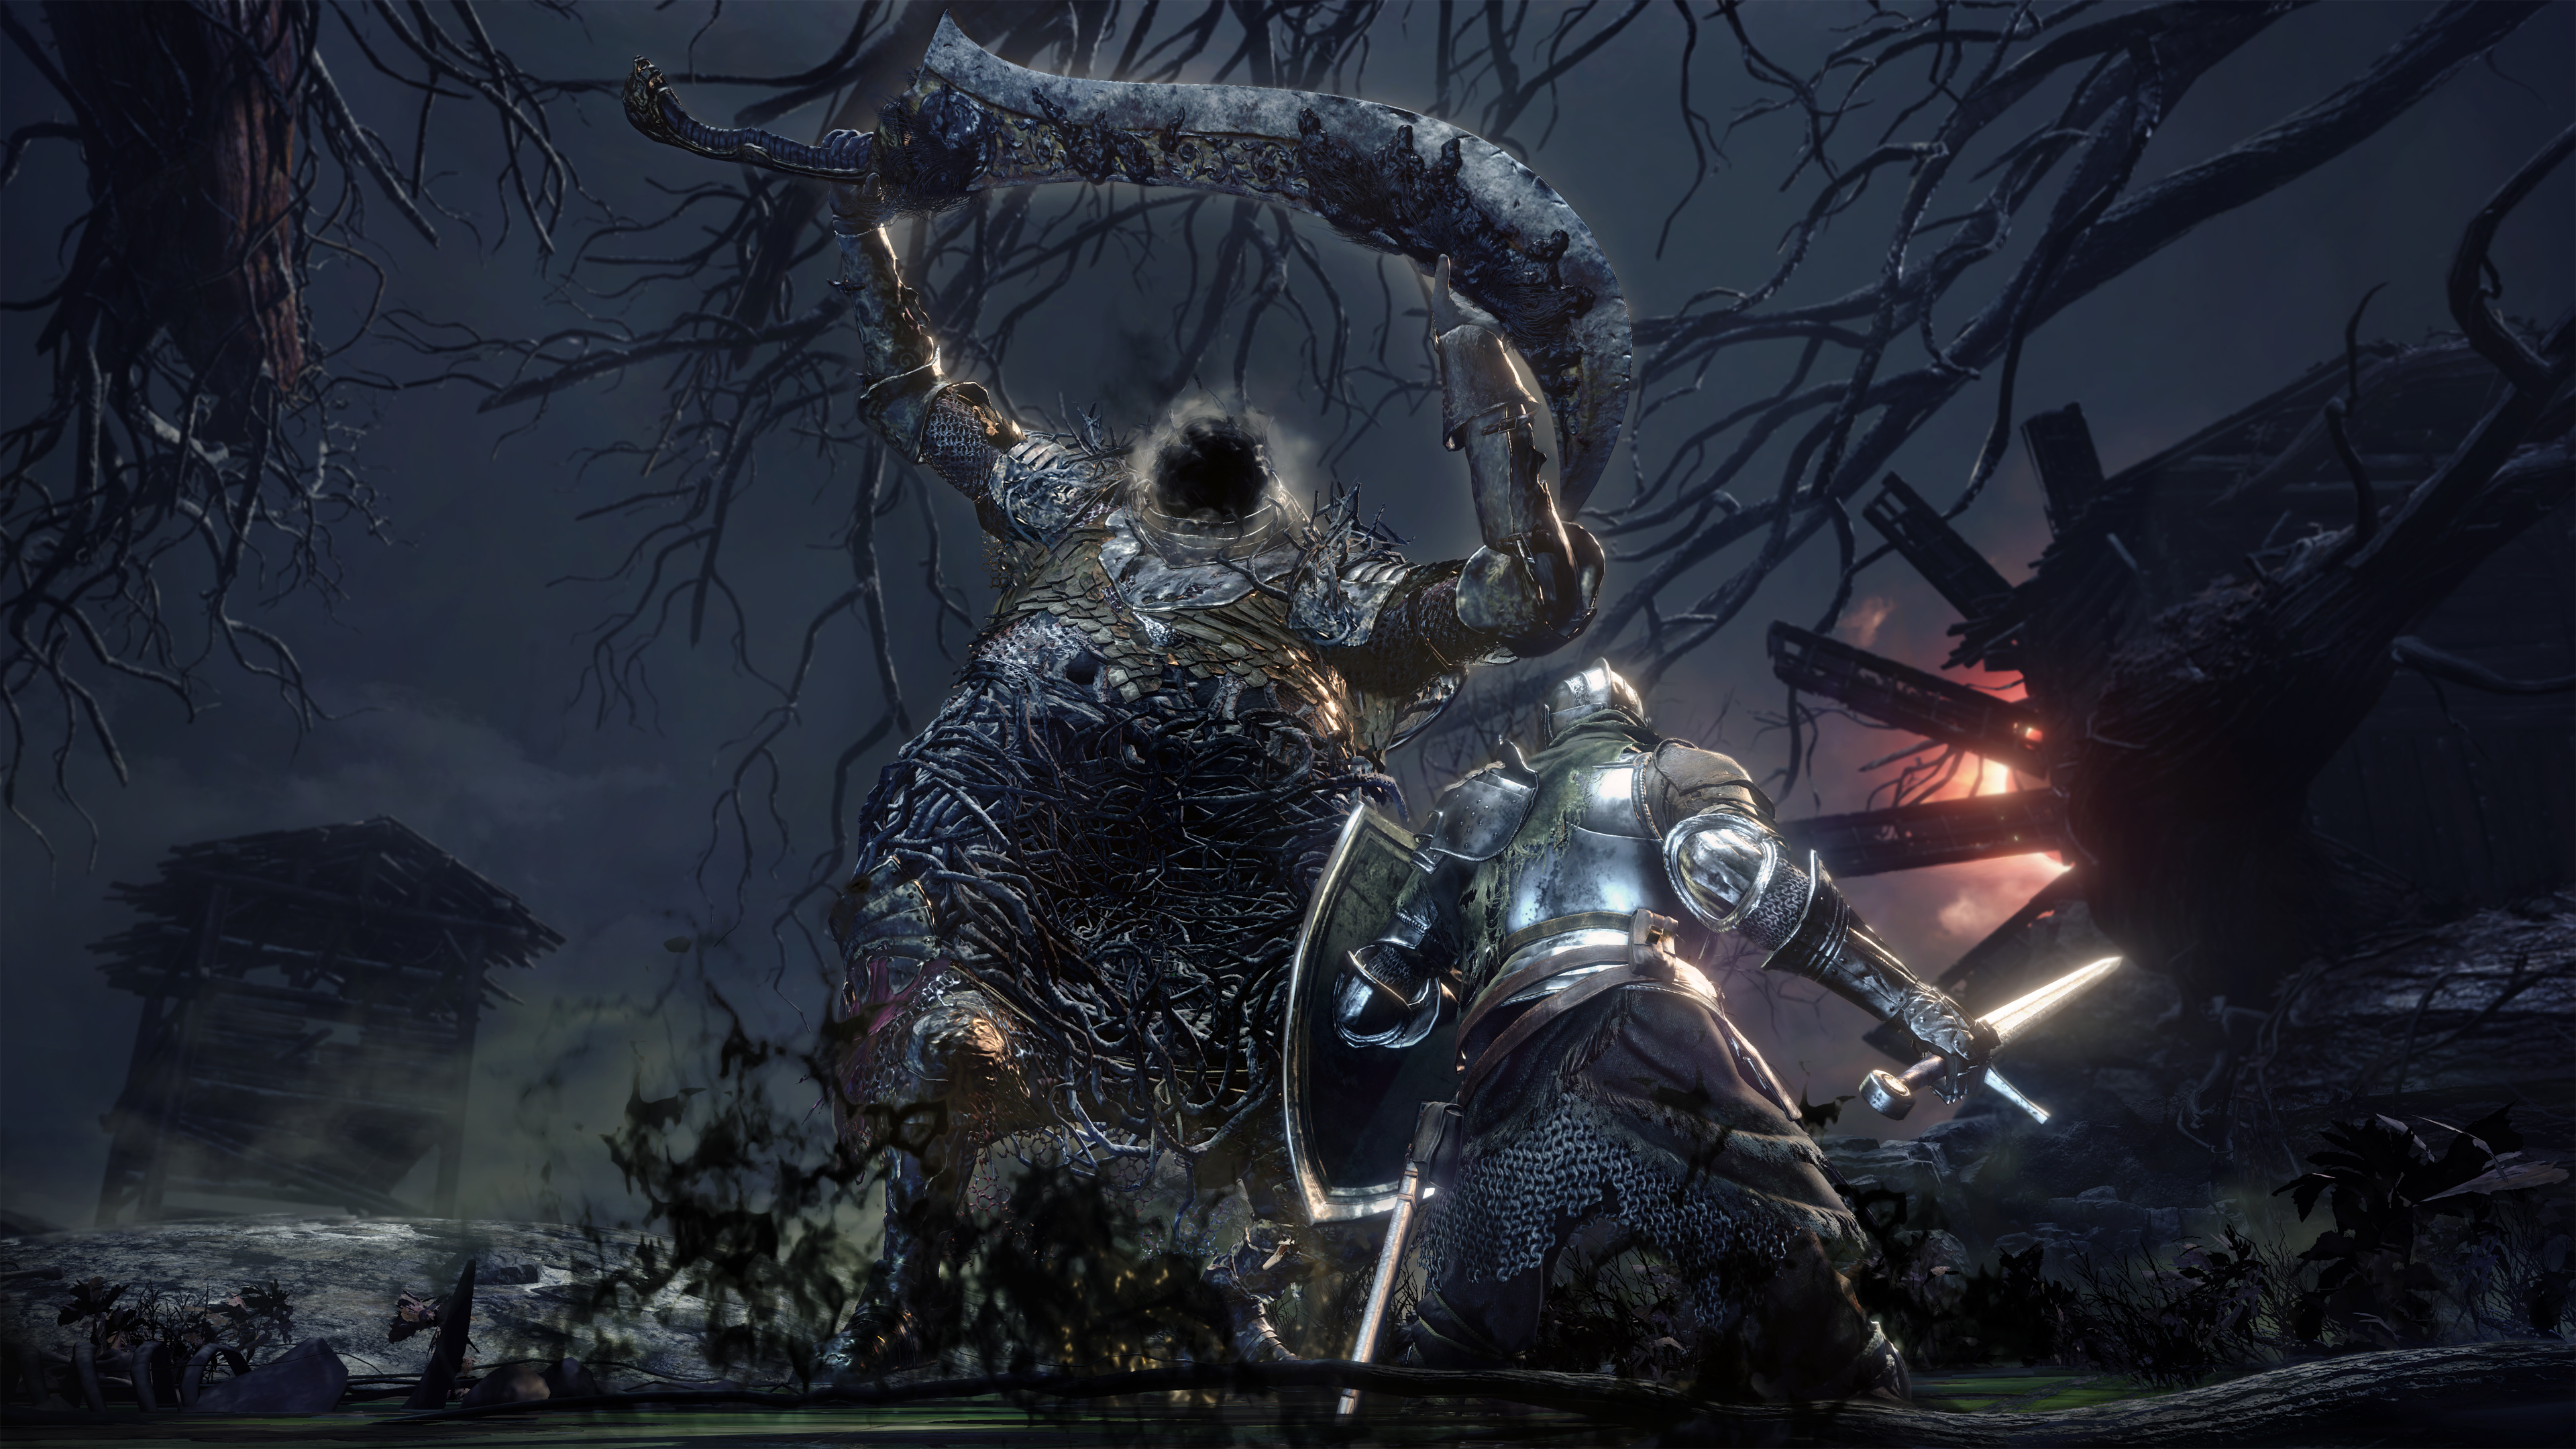 New Dark Souls III “The Ringed City” DLC Details, Screenshots, and Gameplay Released